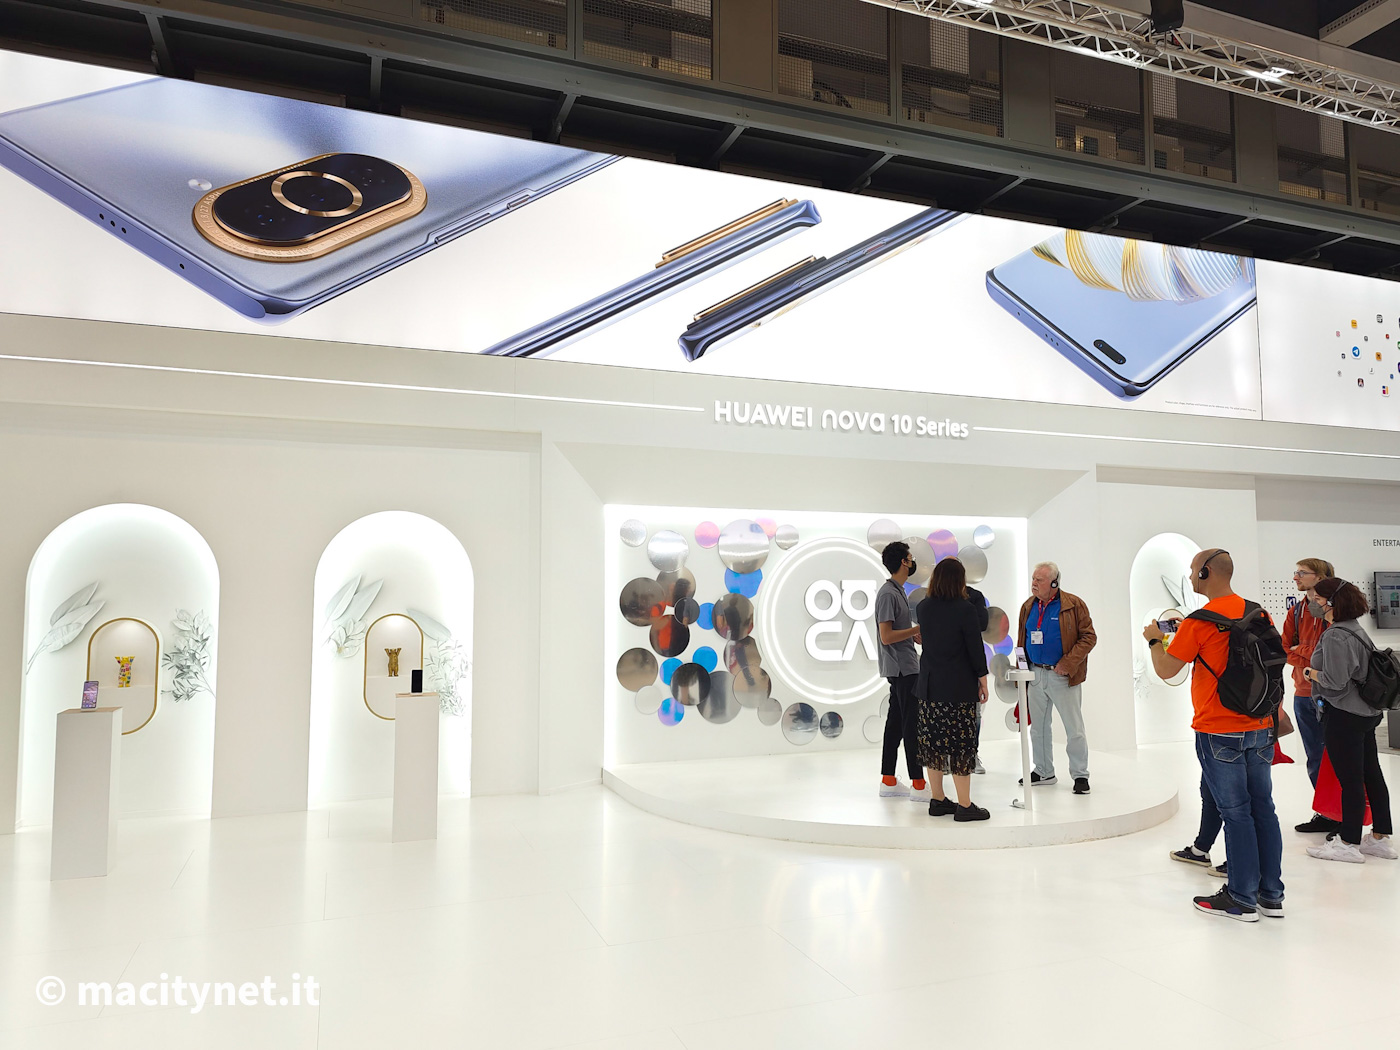 Huawei at IFA 2022 with many new features including smartphones, tablets and health watches